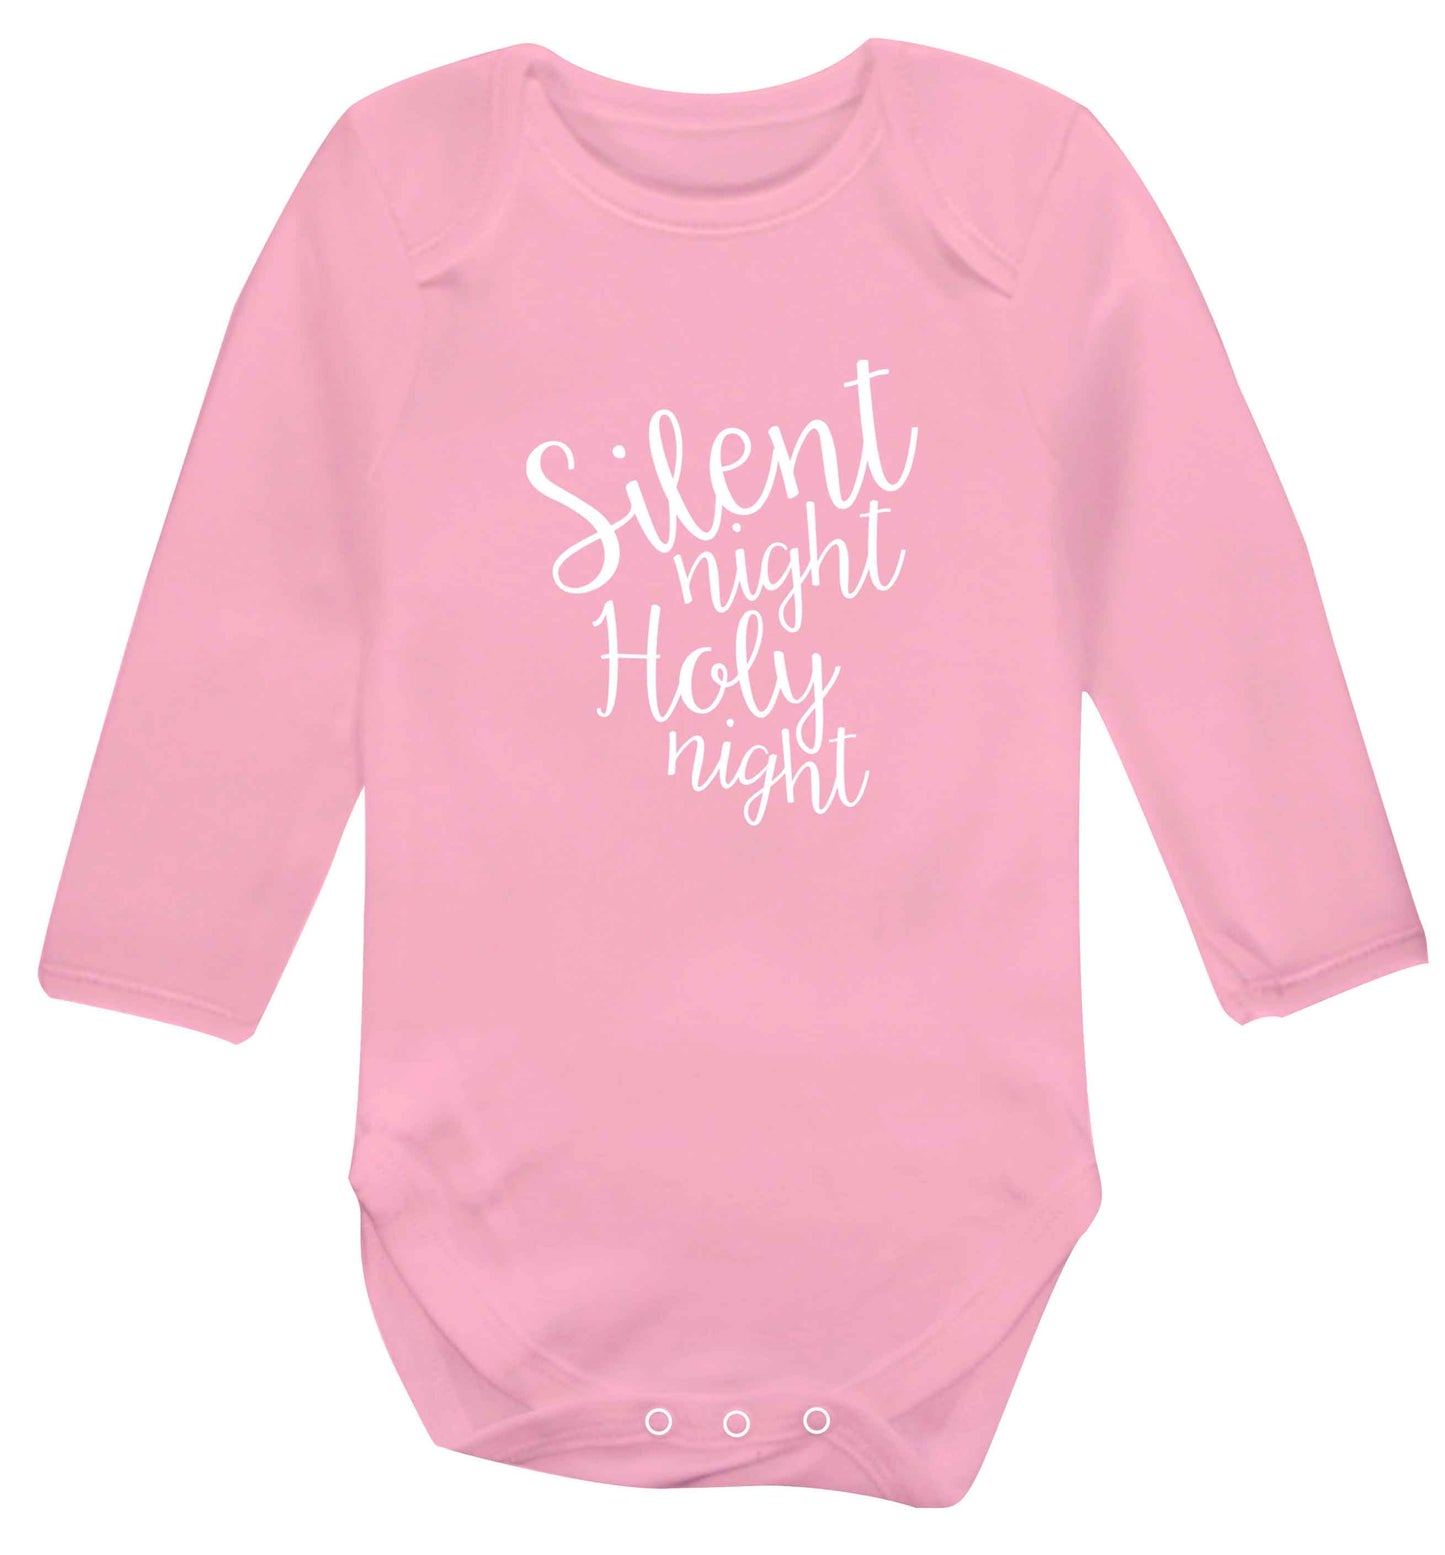 Silent night holy night baby vest long sleeved pale pink 6-12 months